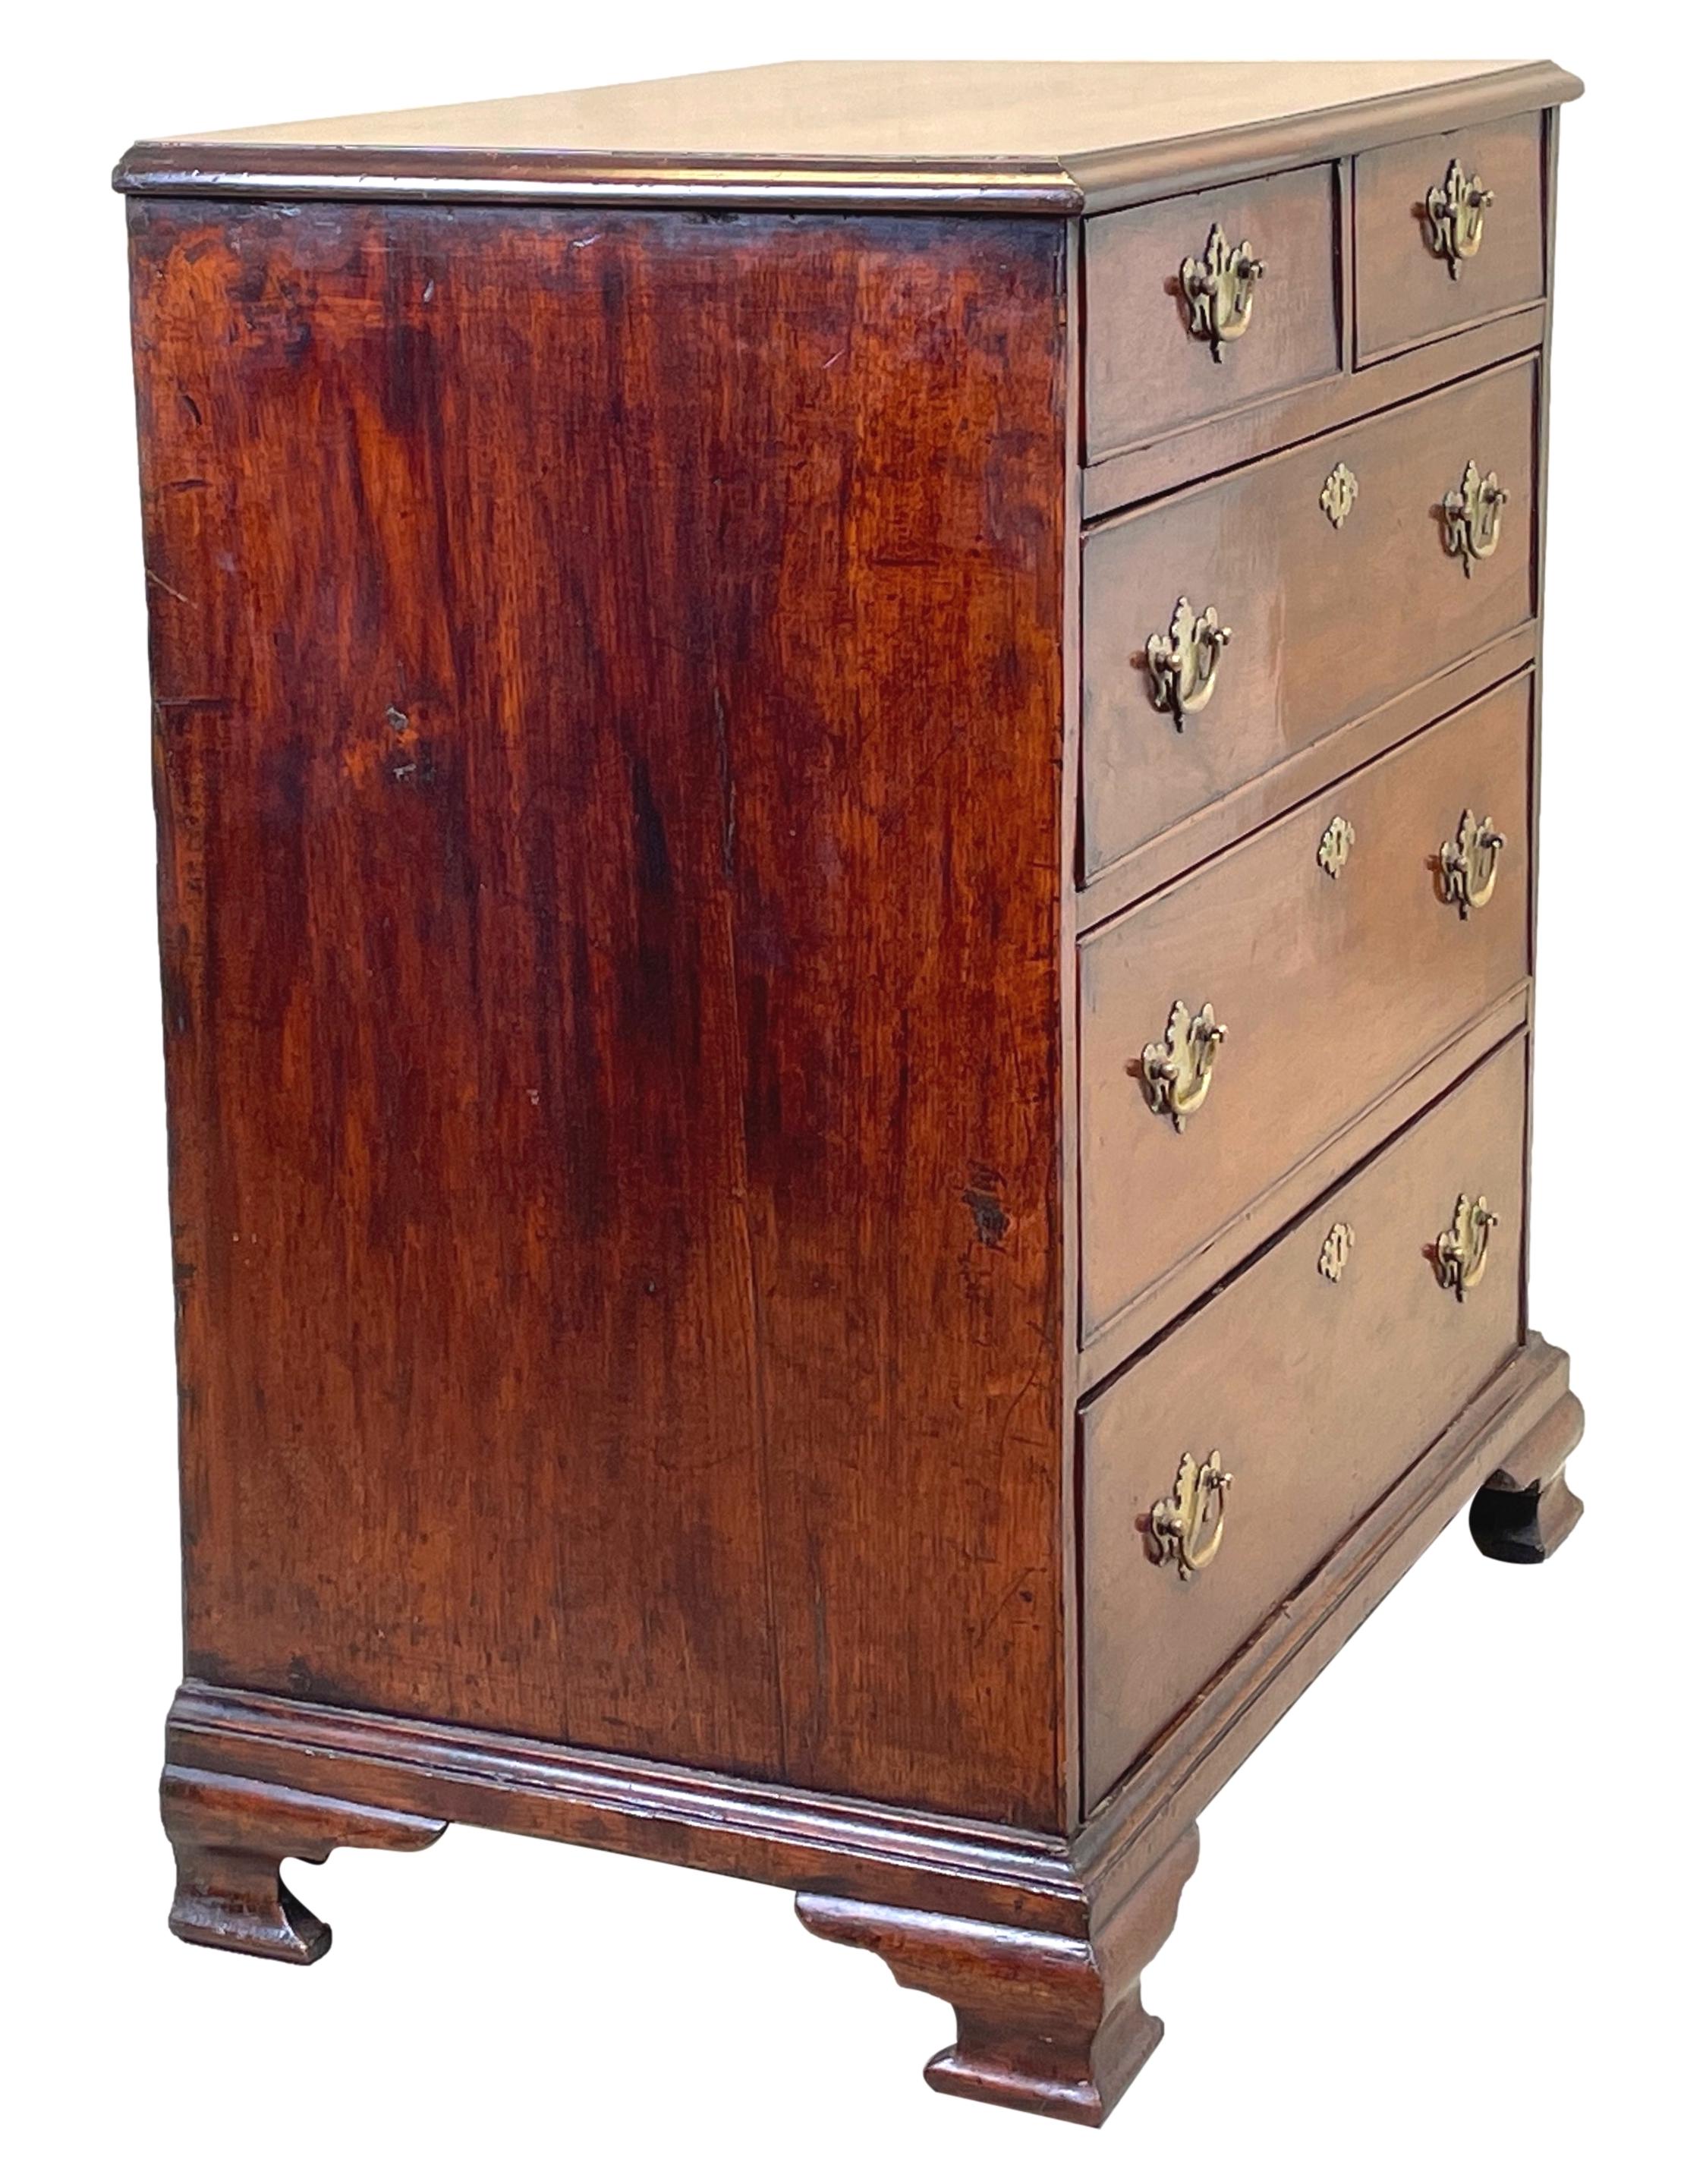 A Very Attractive George II Period Mahogany Chest, Of Diminutive Proportions, Having Superbly Figured Top Over Two Short And Three Long Drawers, With Replacement Brass Handles, Raised On Elegant Original Ogee Bracket Feet. 

This fabulous little